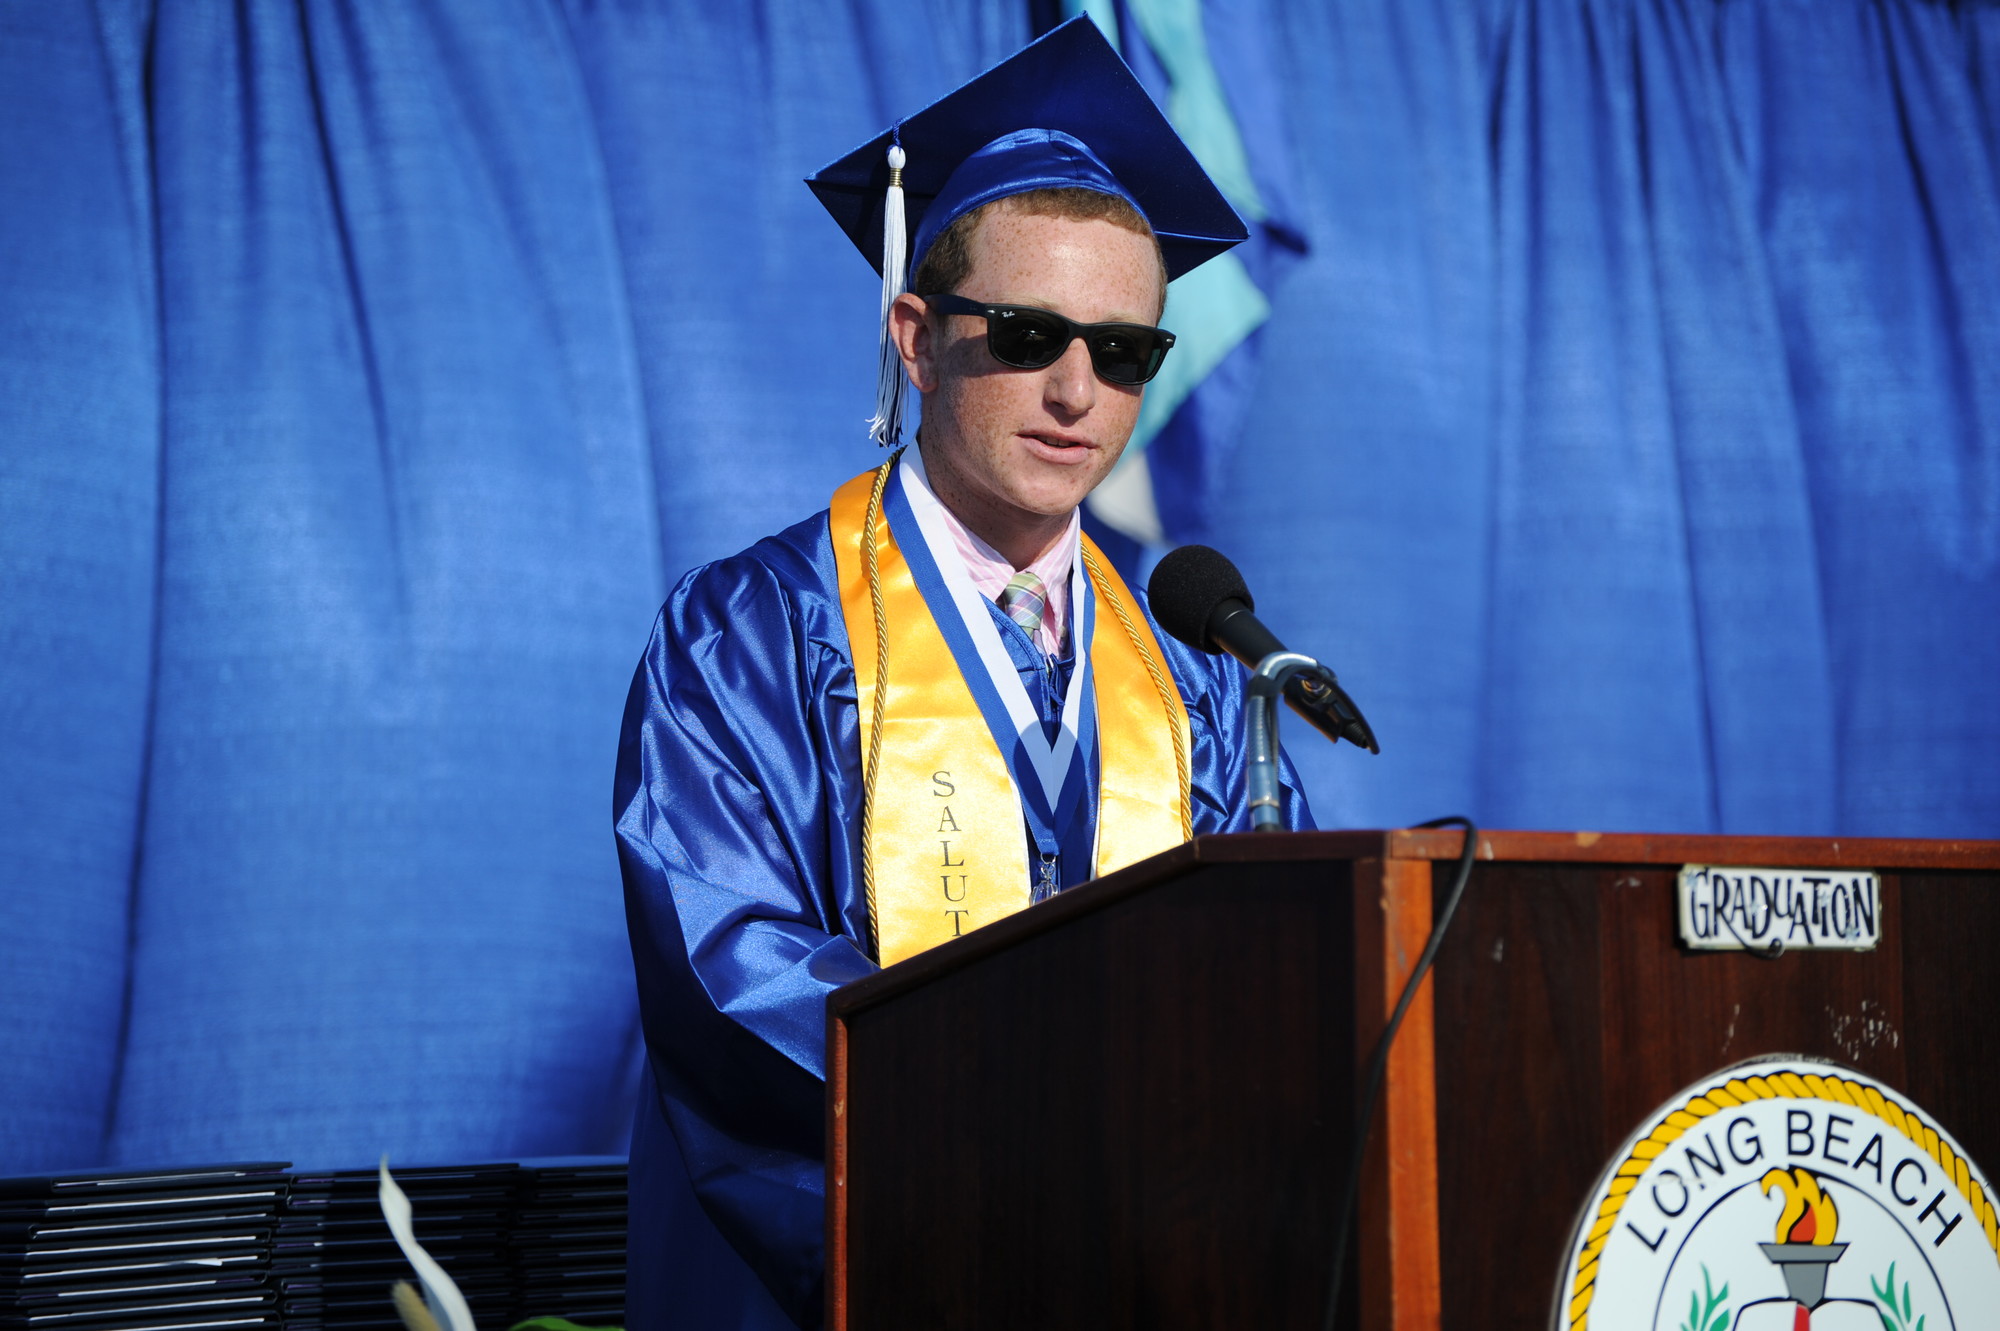 Salutatorian Corey Ochs reminded his fellow graduates of the value of their good names.